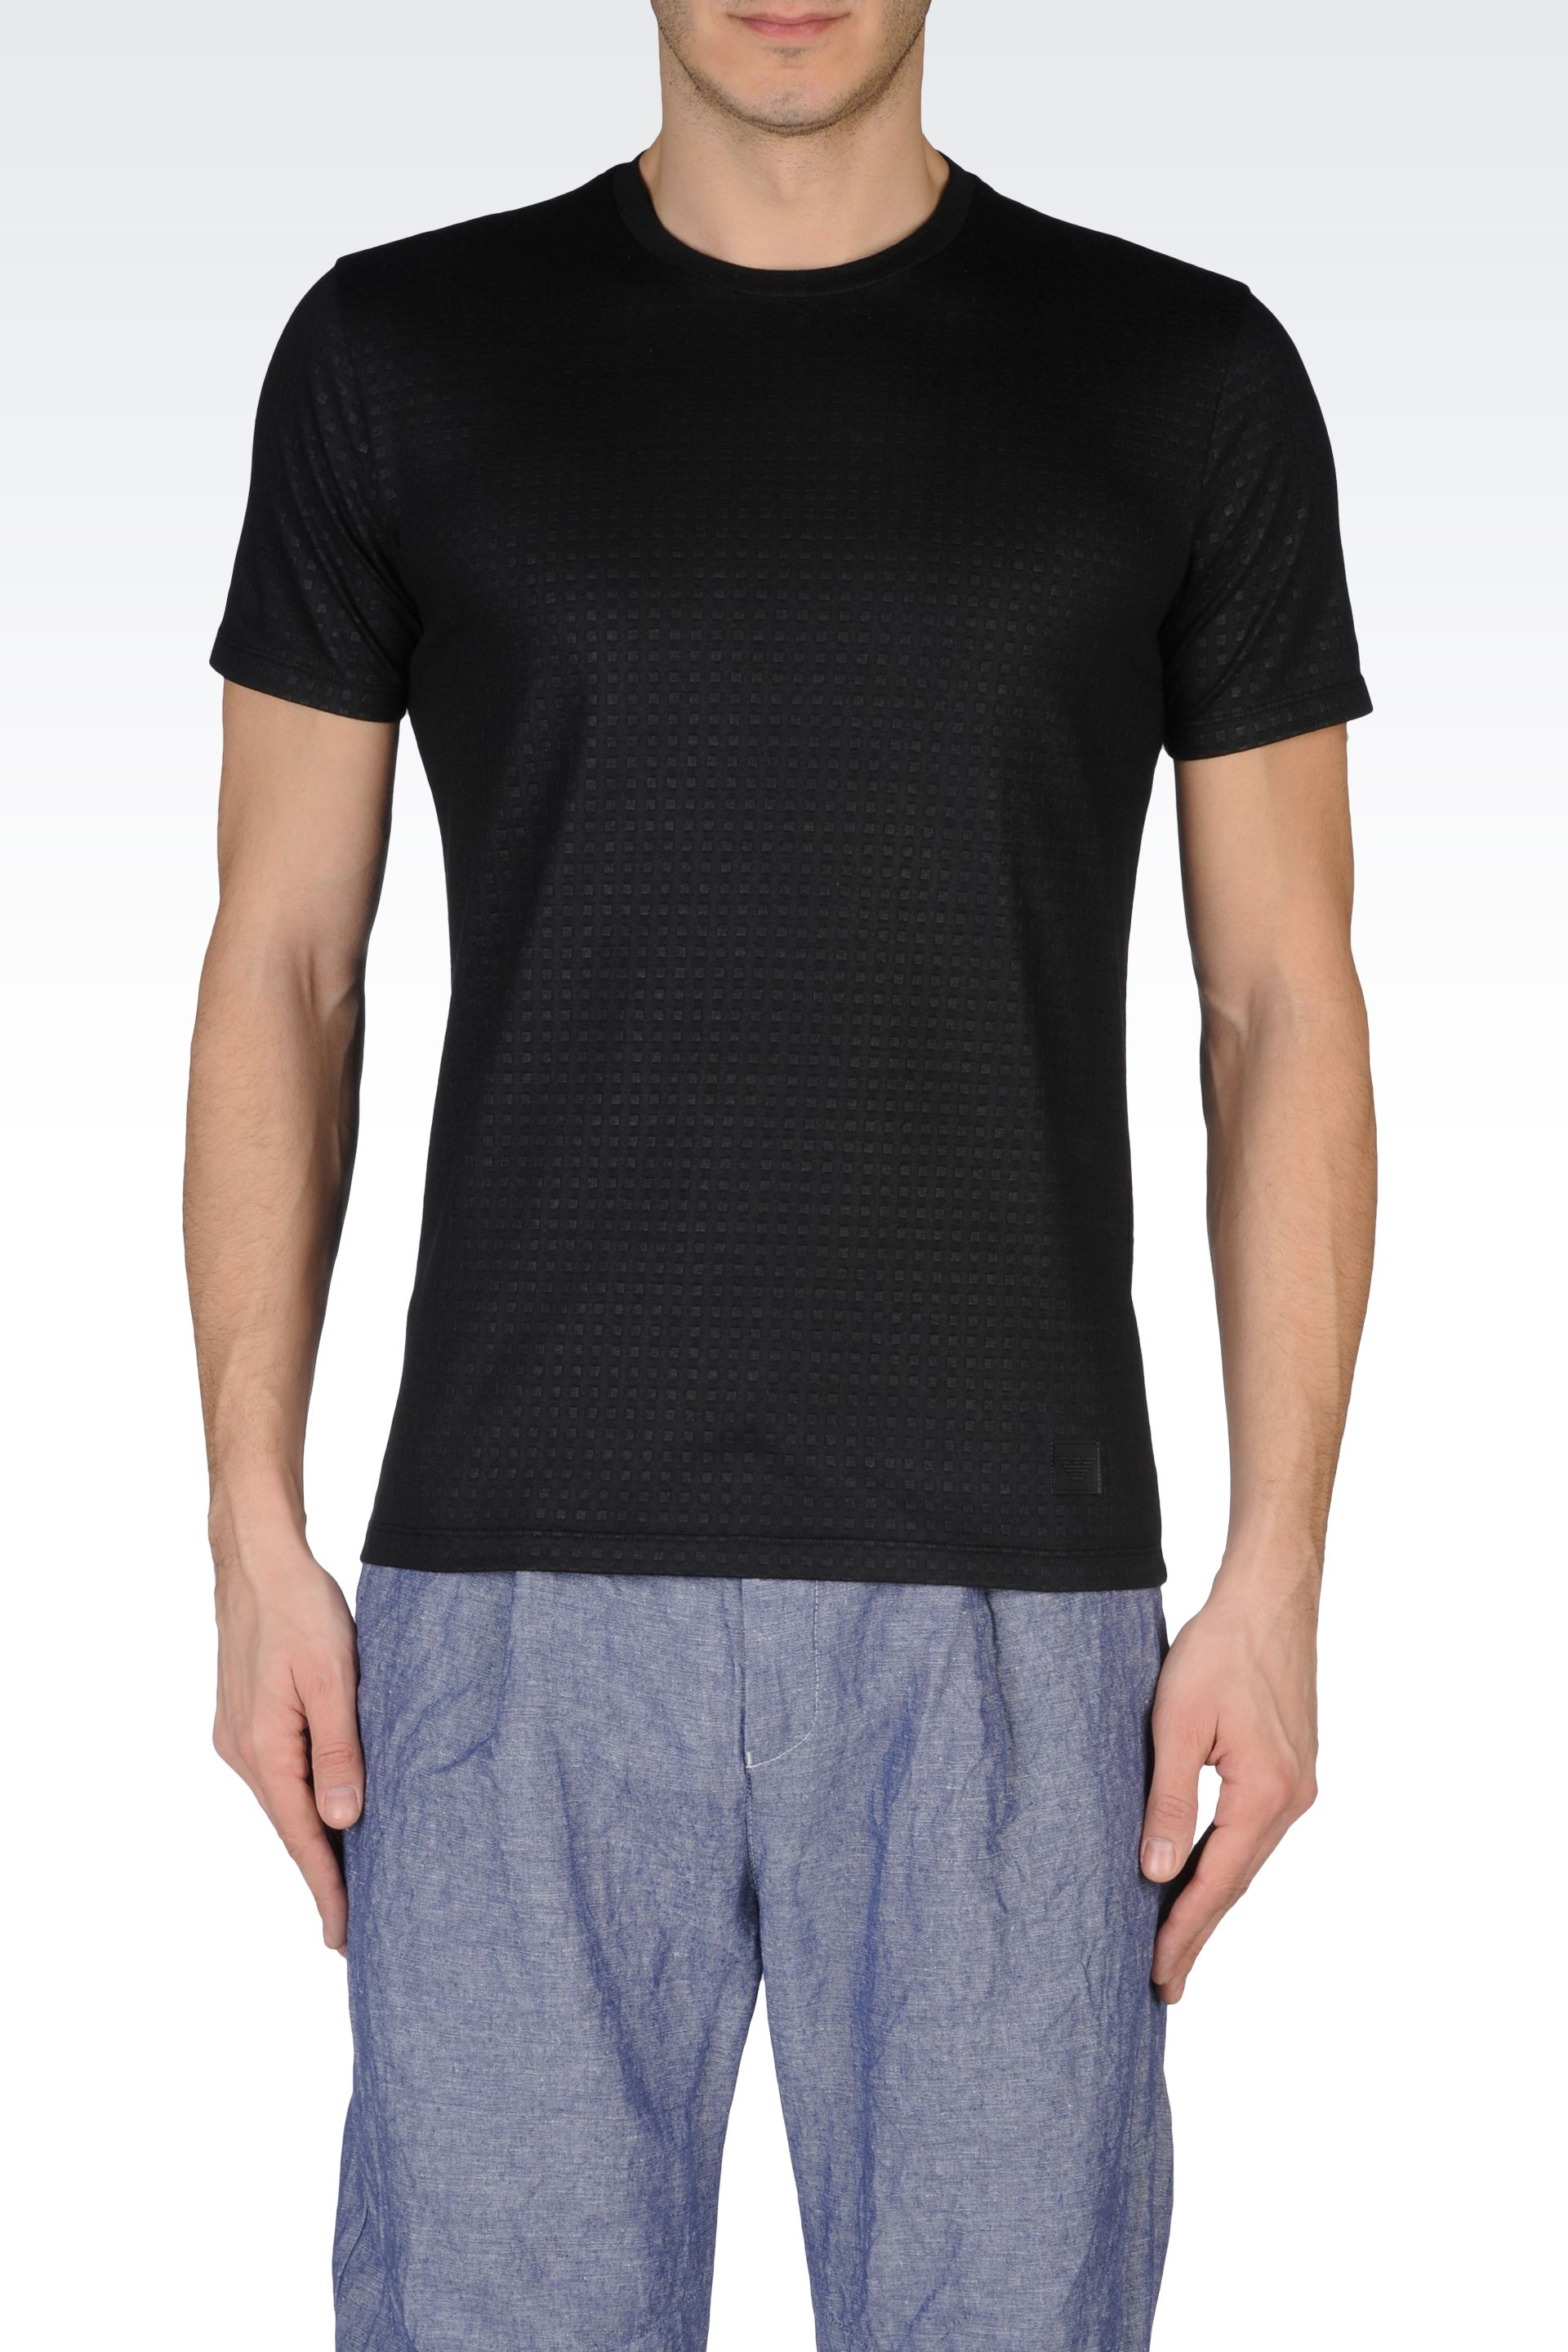 Emporio Armani Checked Jersey Tshirt in Black for Men | Lyst